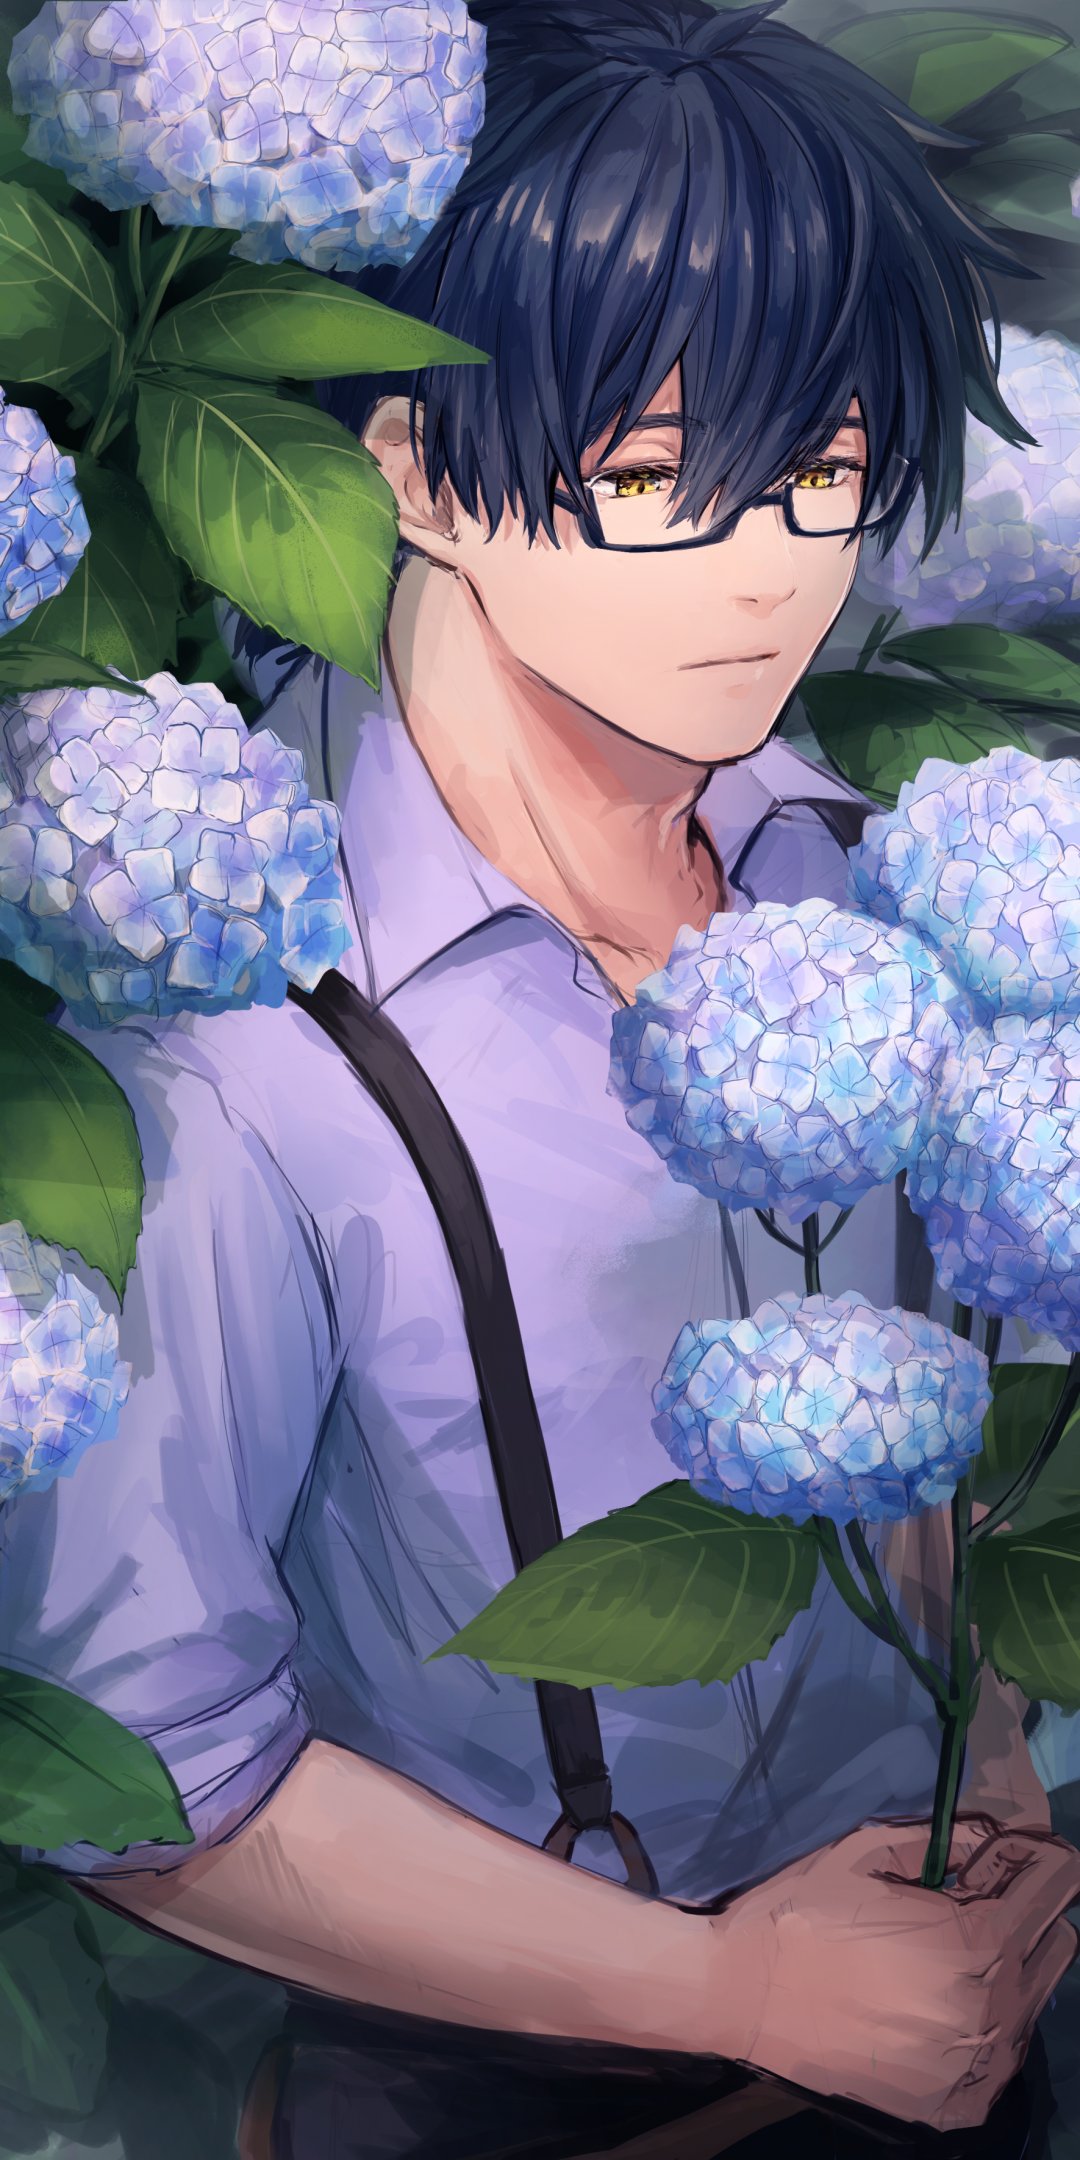 Download 1080x2160 Anime Boy, Glasses, Purple Flowers Wallpaper for Huawei Mate 10